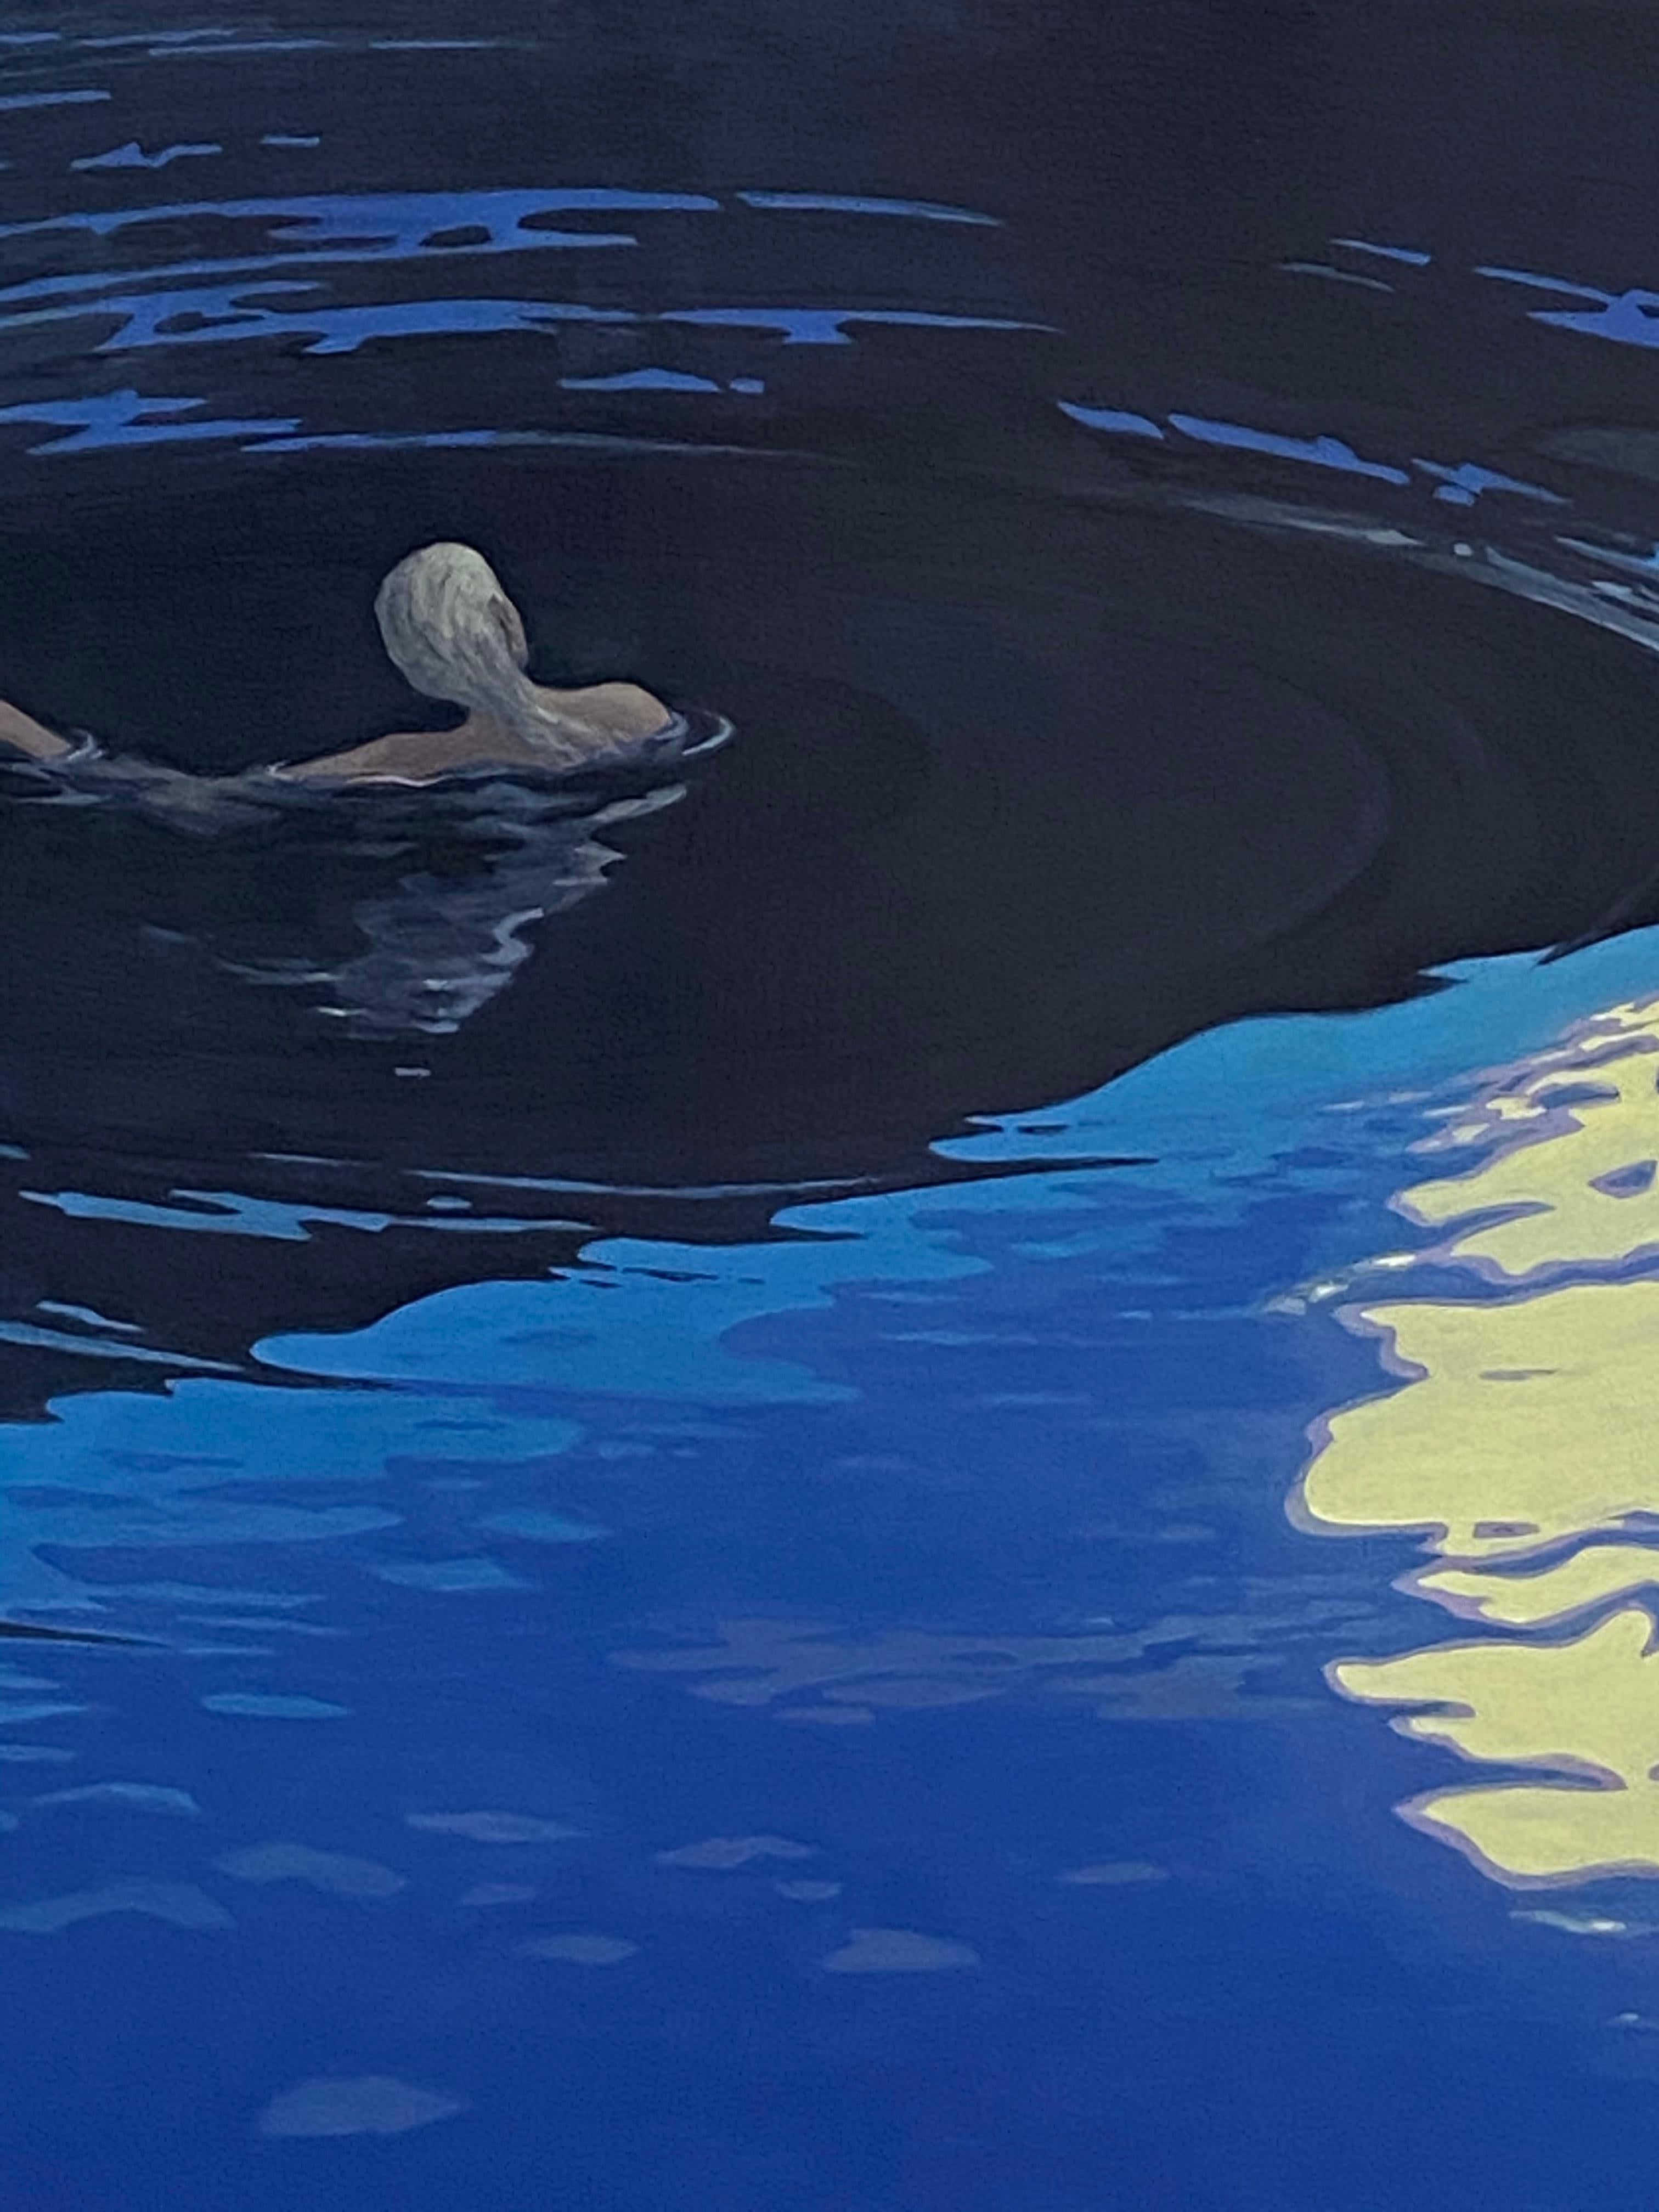 A graceful, fair-haired female figure swims with her back turned in inviting, dark midnight blue water. A round, luminous, glowing moon reflects on the water's rippling surface in this painting set at nightfall by KK Kozik. Signed by artist on the